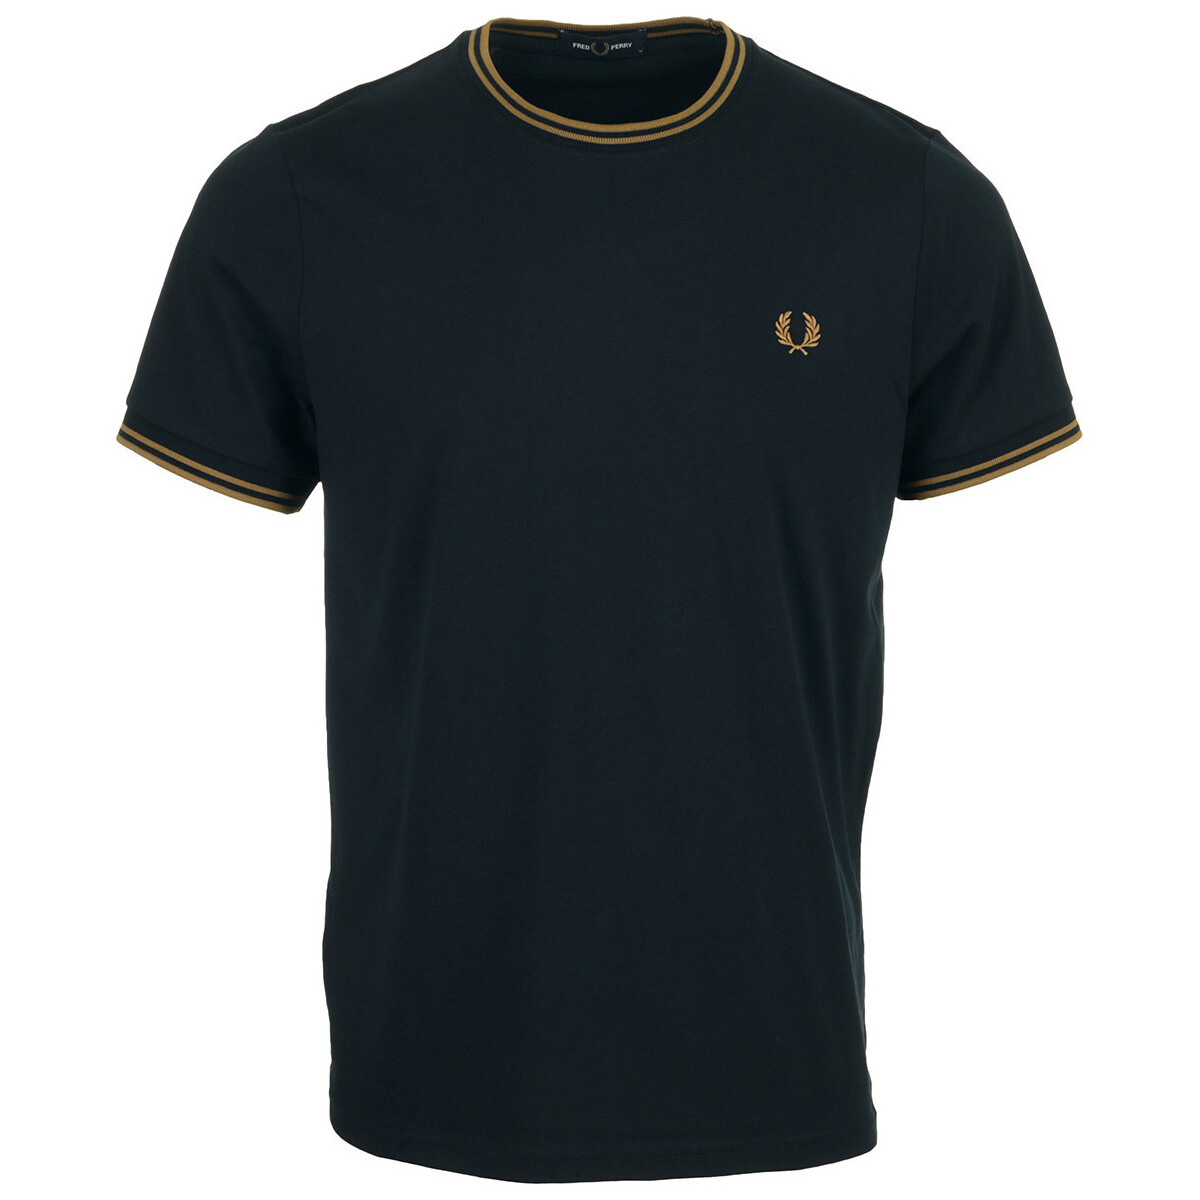 Kleidung Herren T-Shirts Fred Perry Twin Tipped Blau